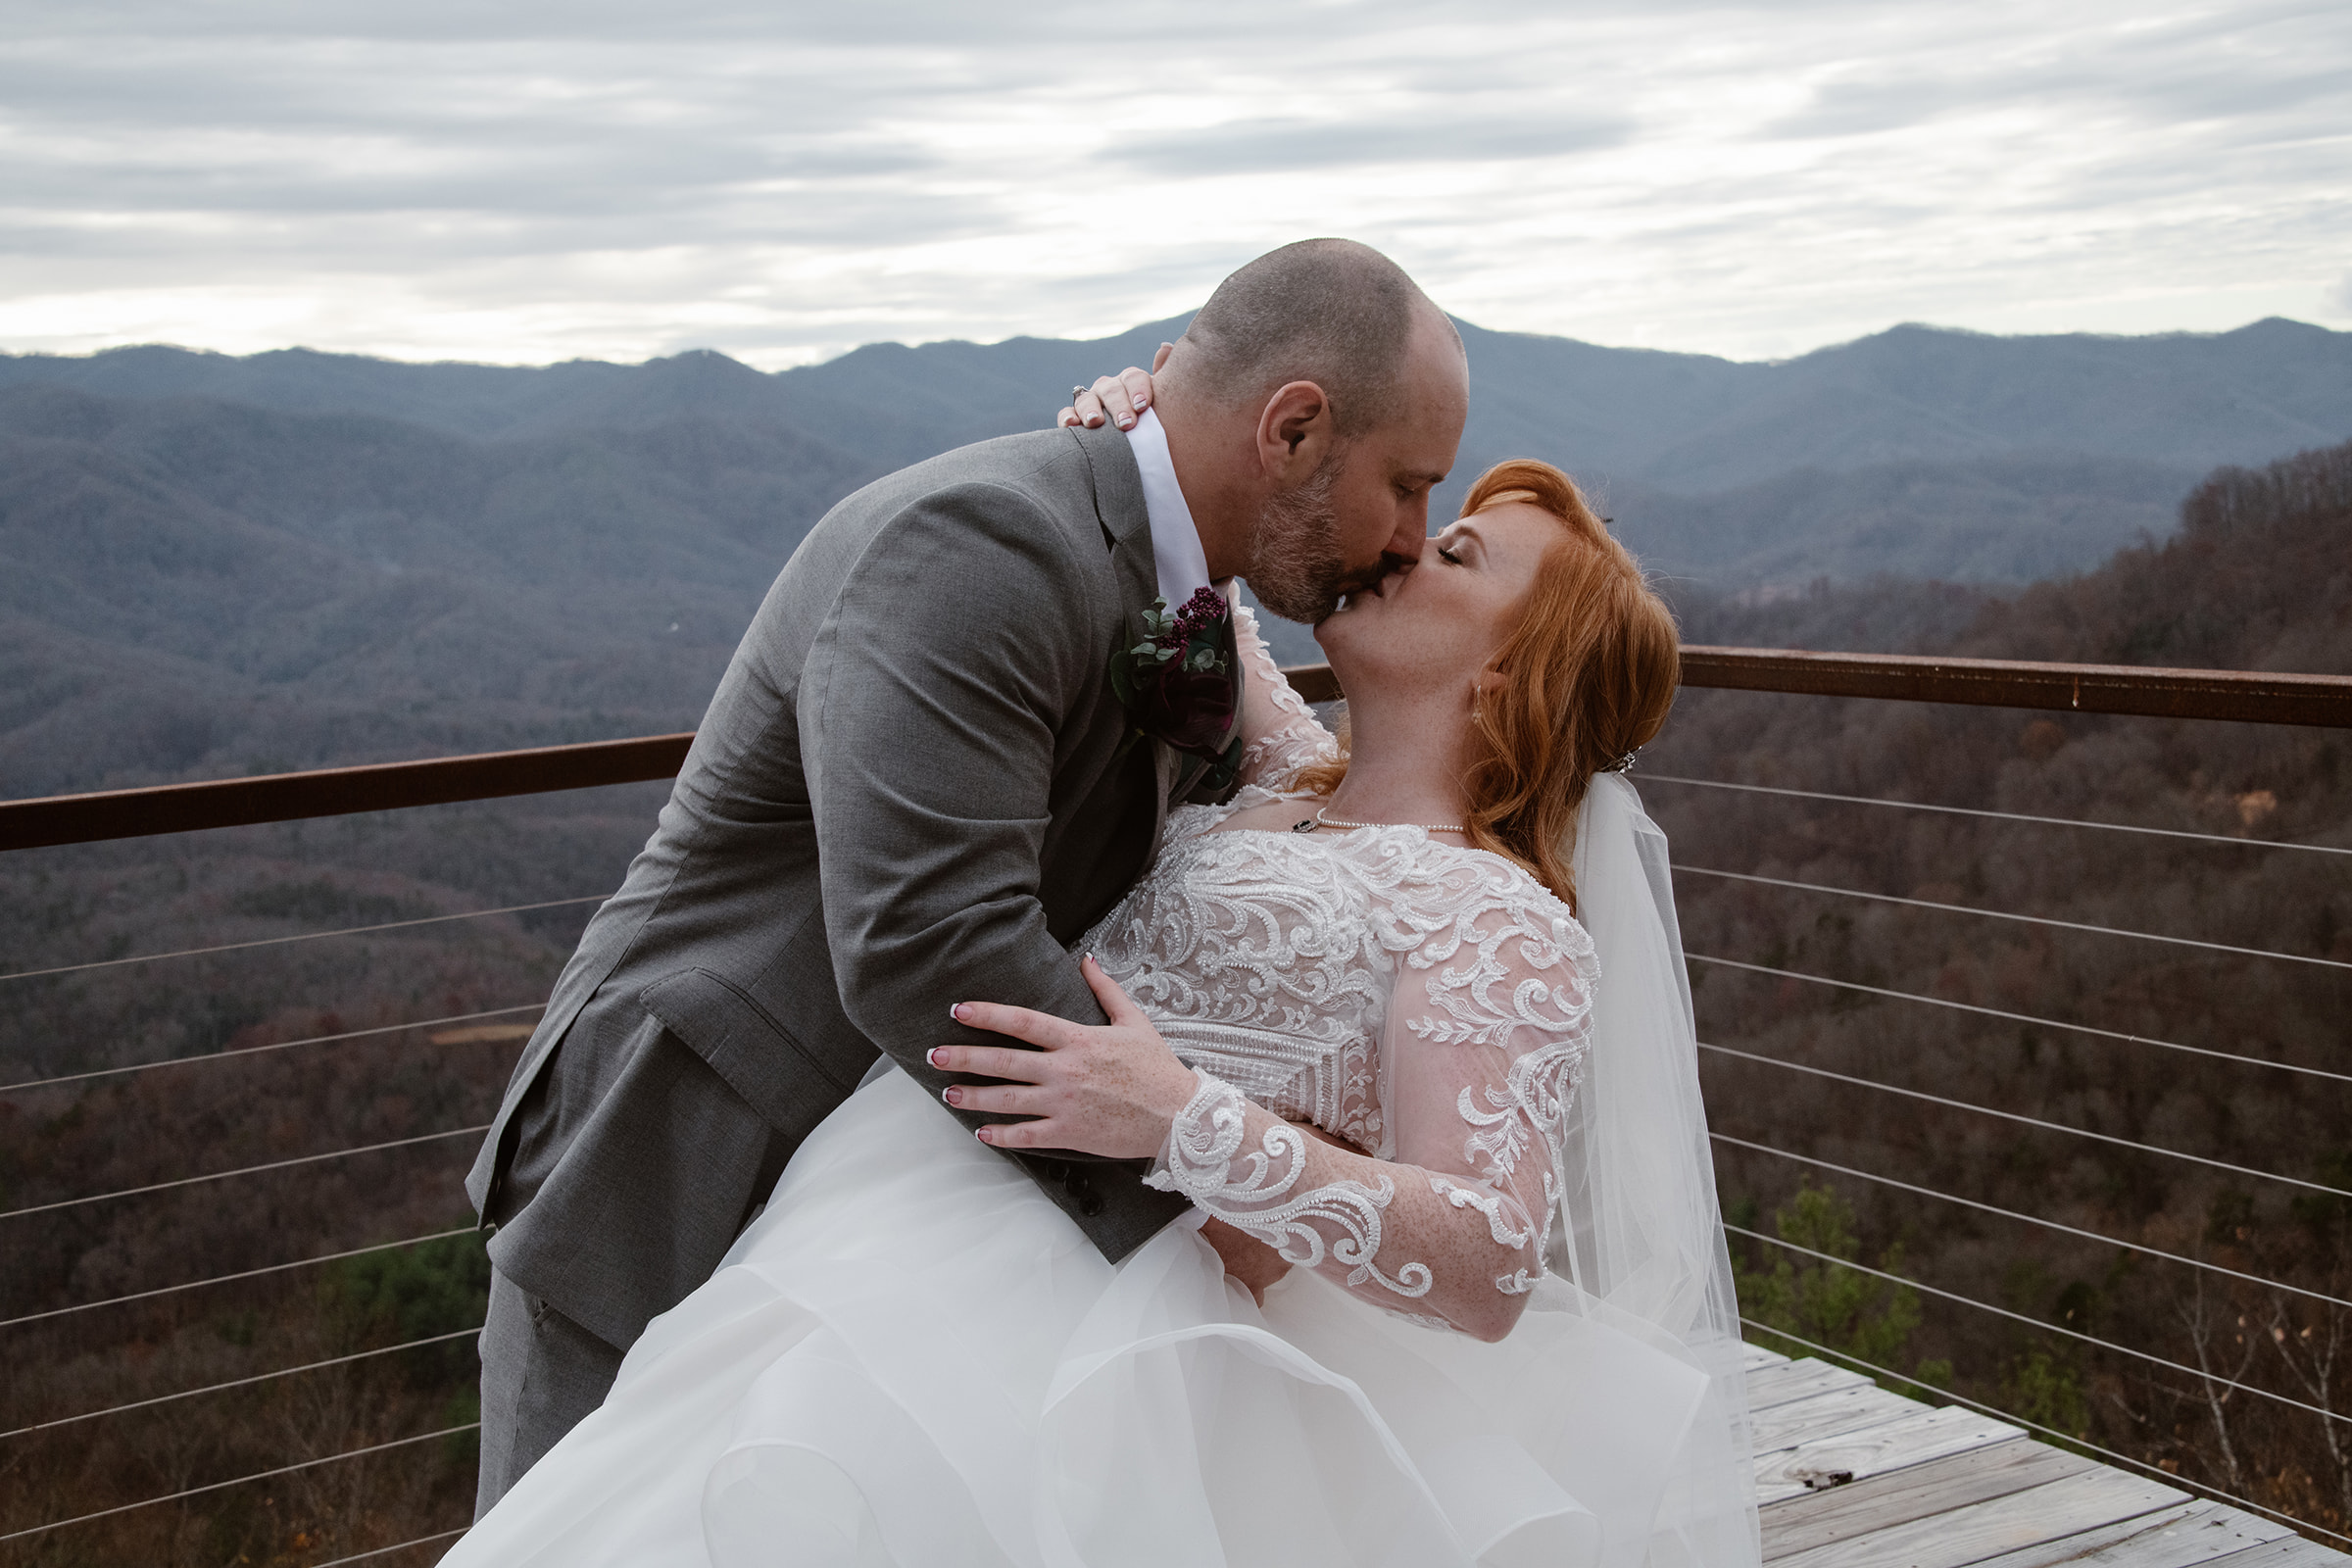 Couple share a passionate kiss overlooking the Blue Ridge Mountains.